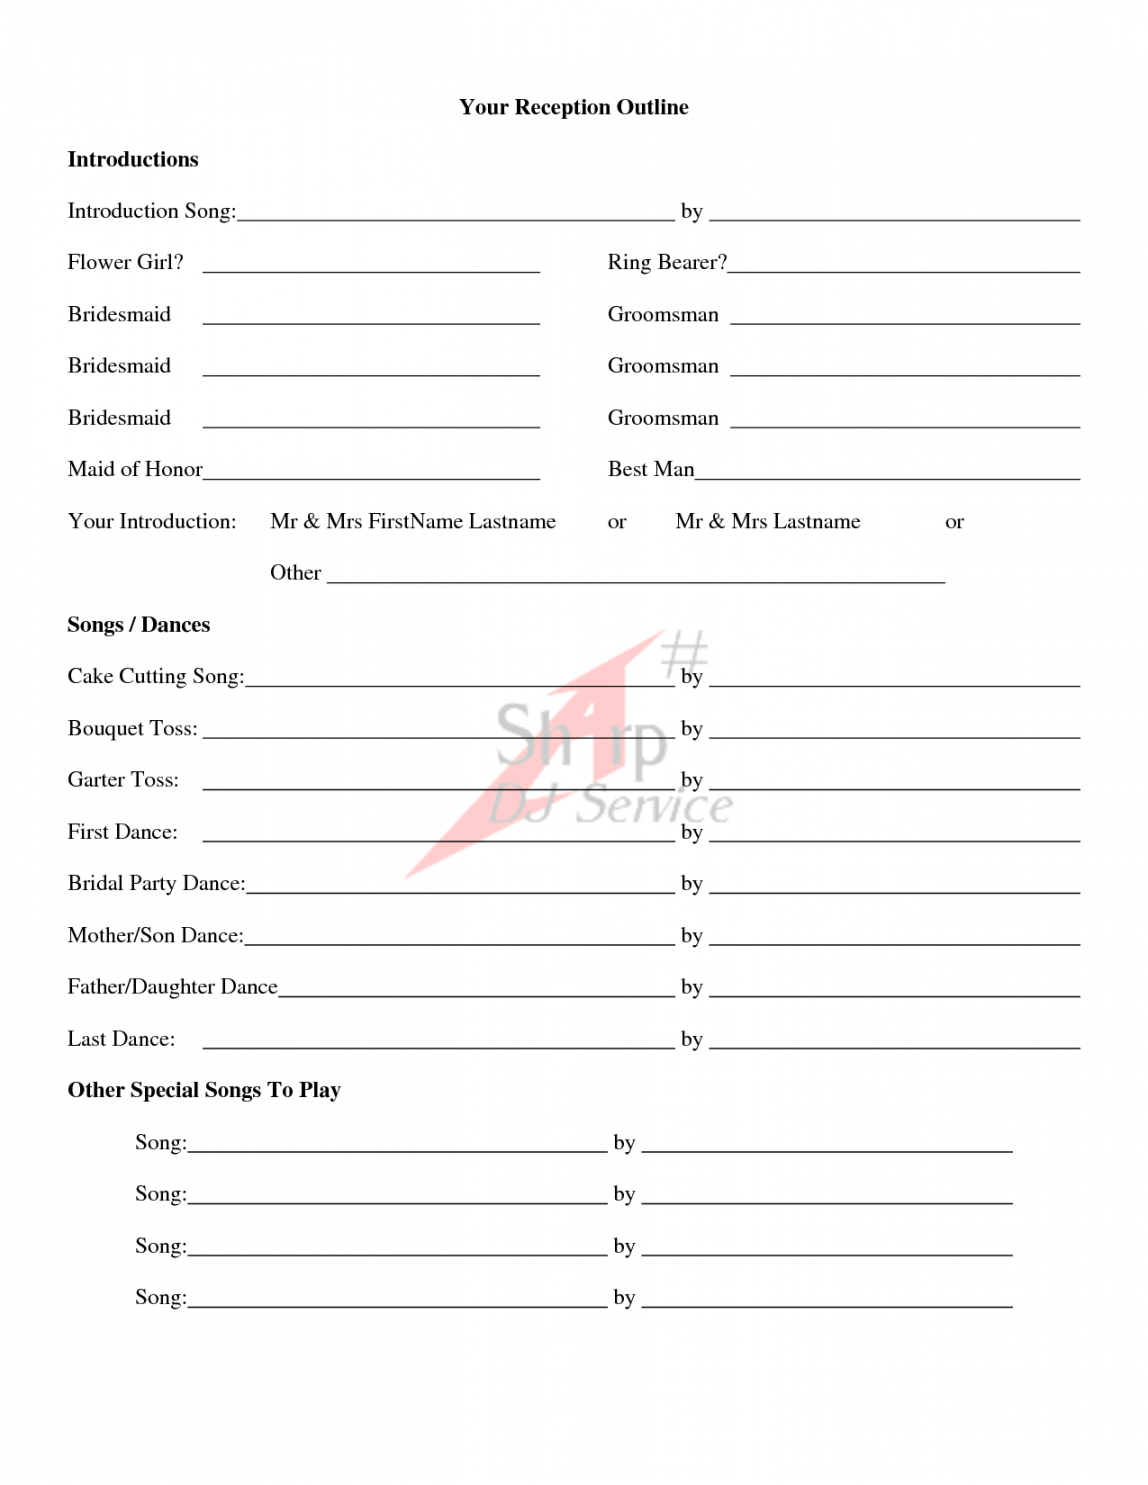 sample wedding ceremony outline examples  wedding ceremony outline wedding ceremony itinerary template